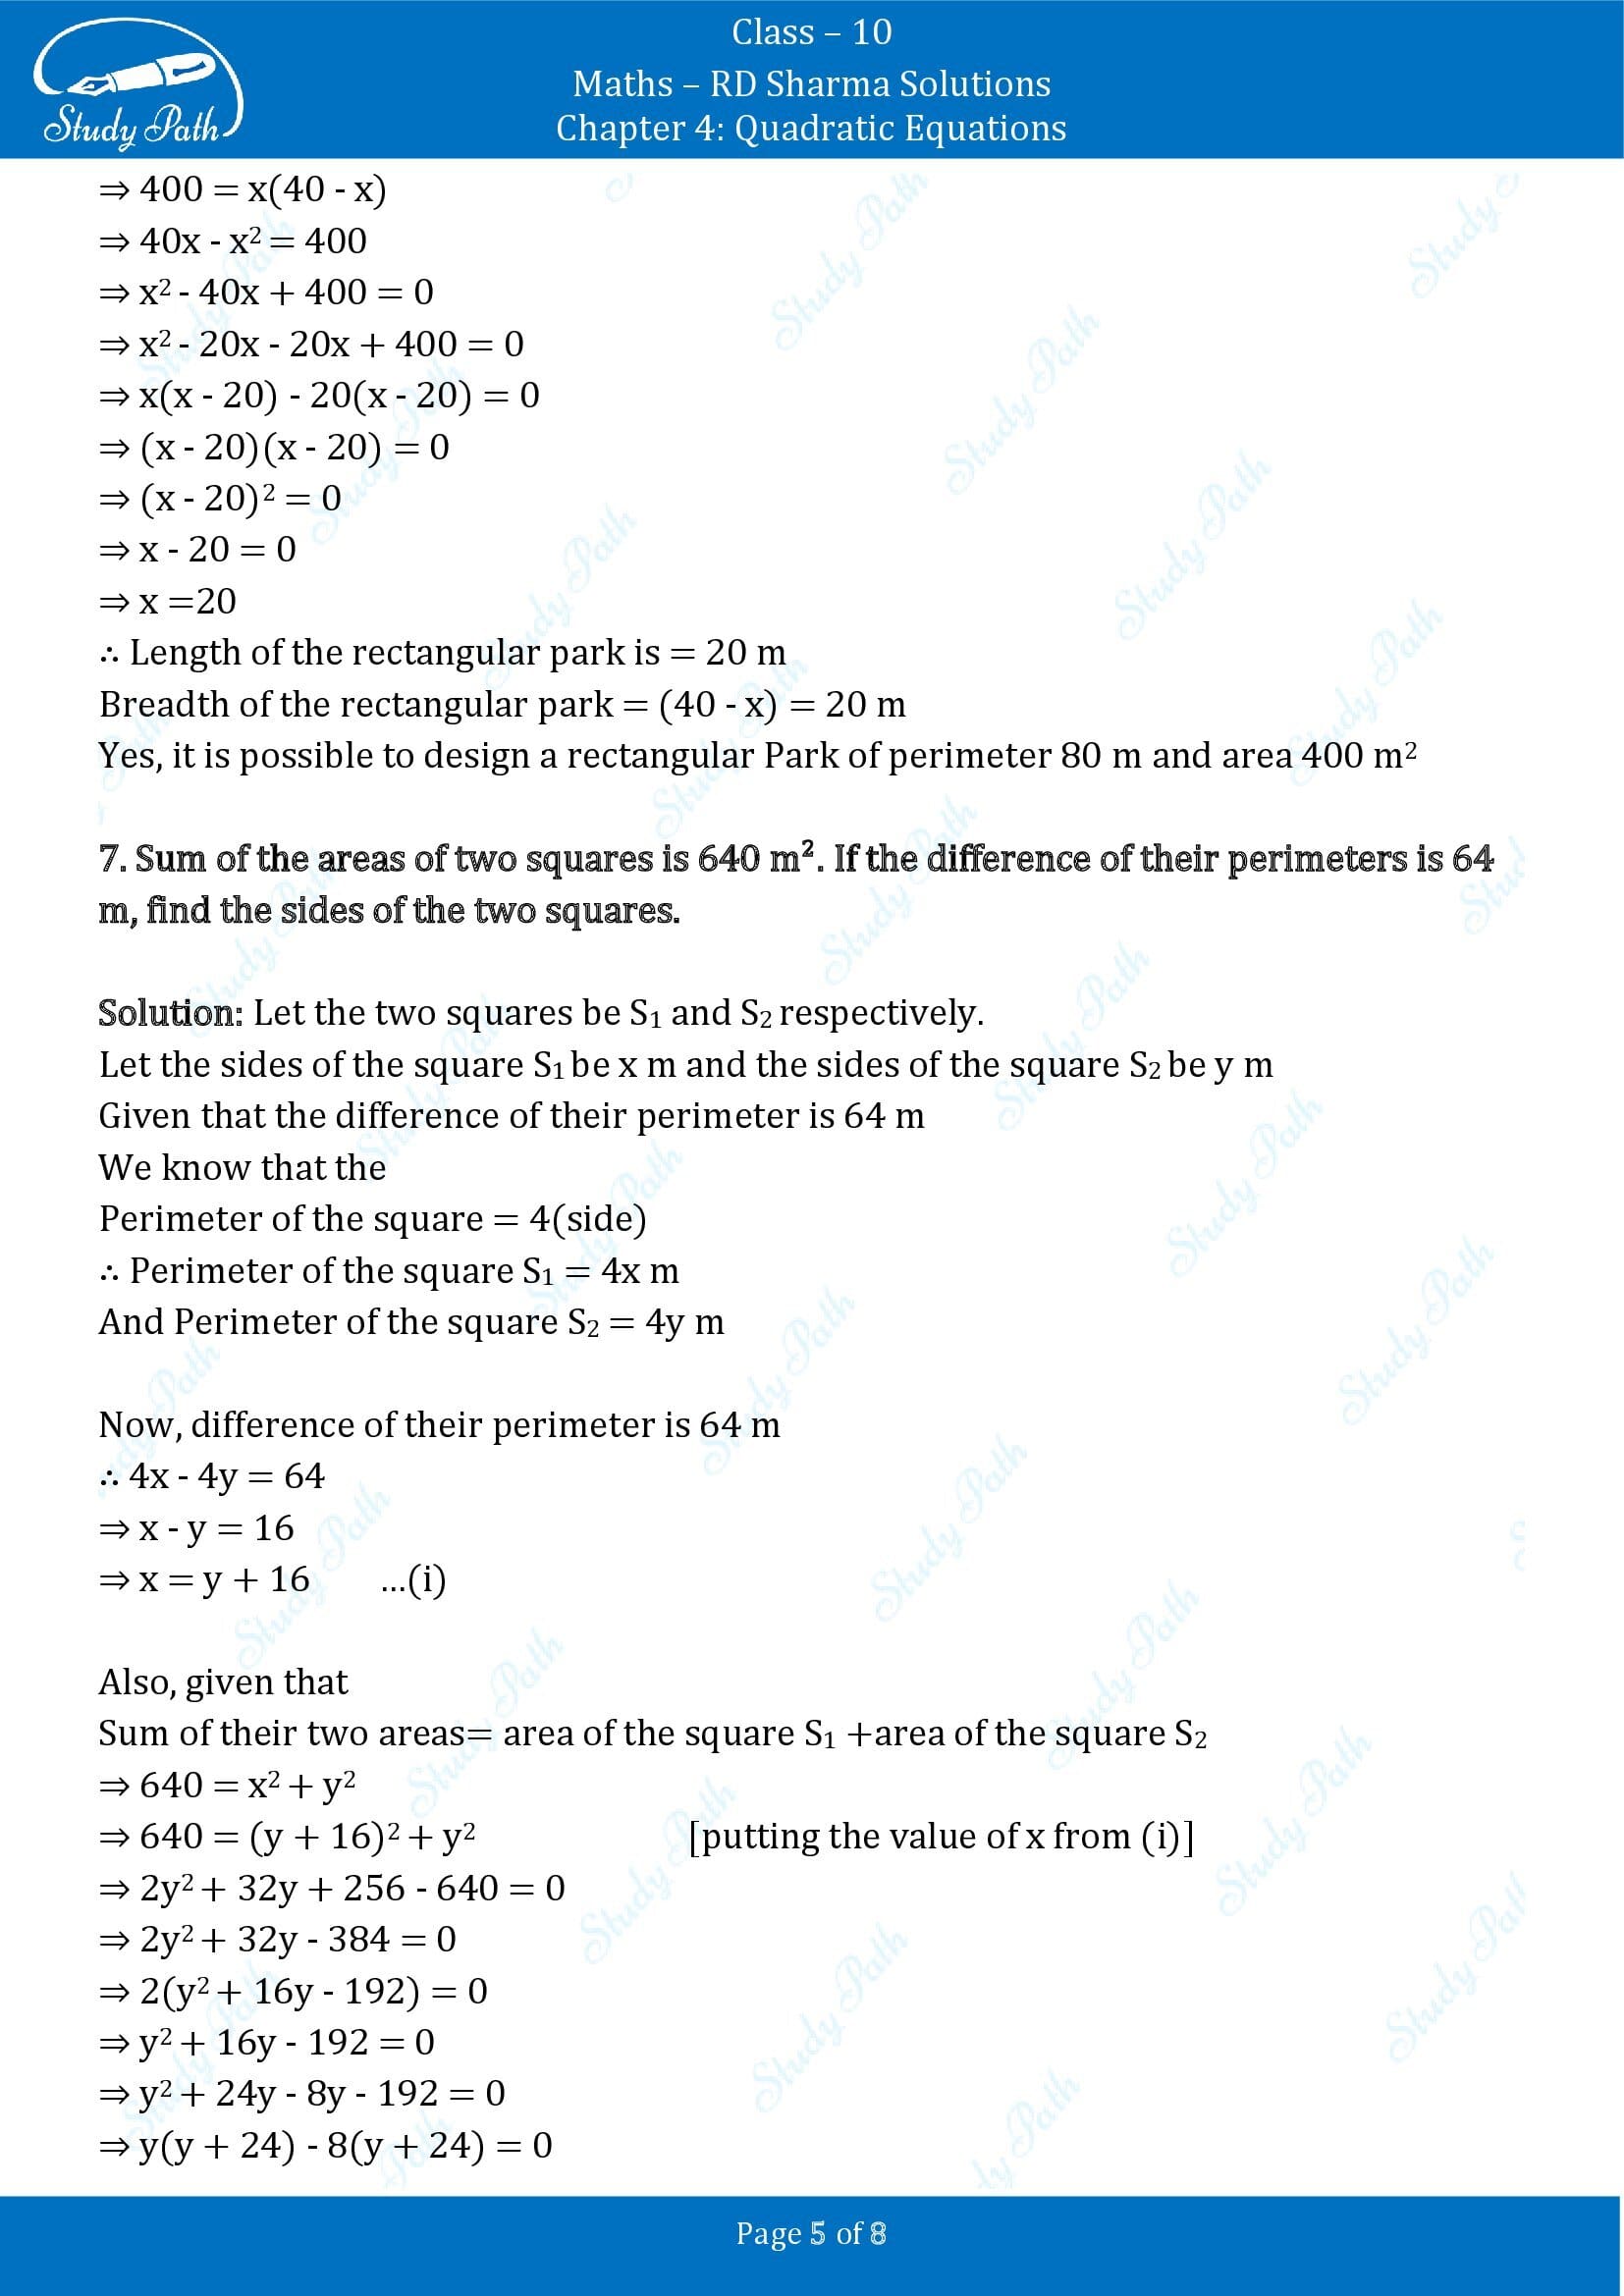 RD Sharma Solutions Class 10 Chapter 4 Quadratic Equations Exercise 4.11 00005